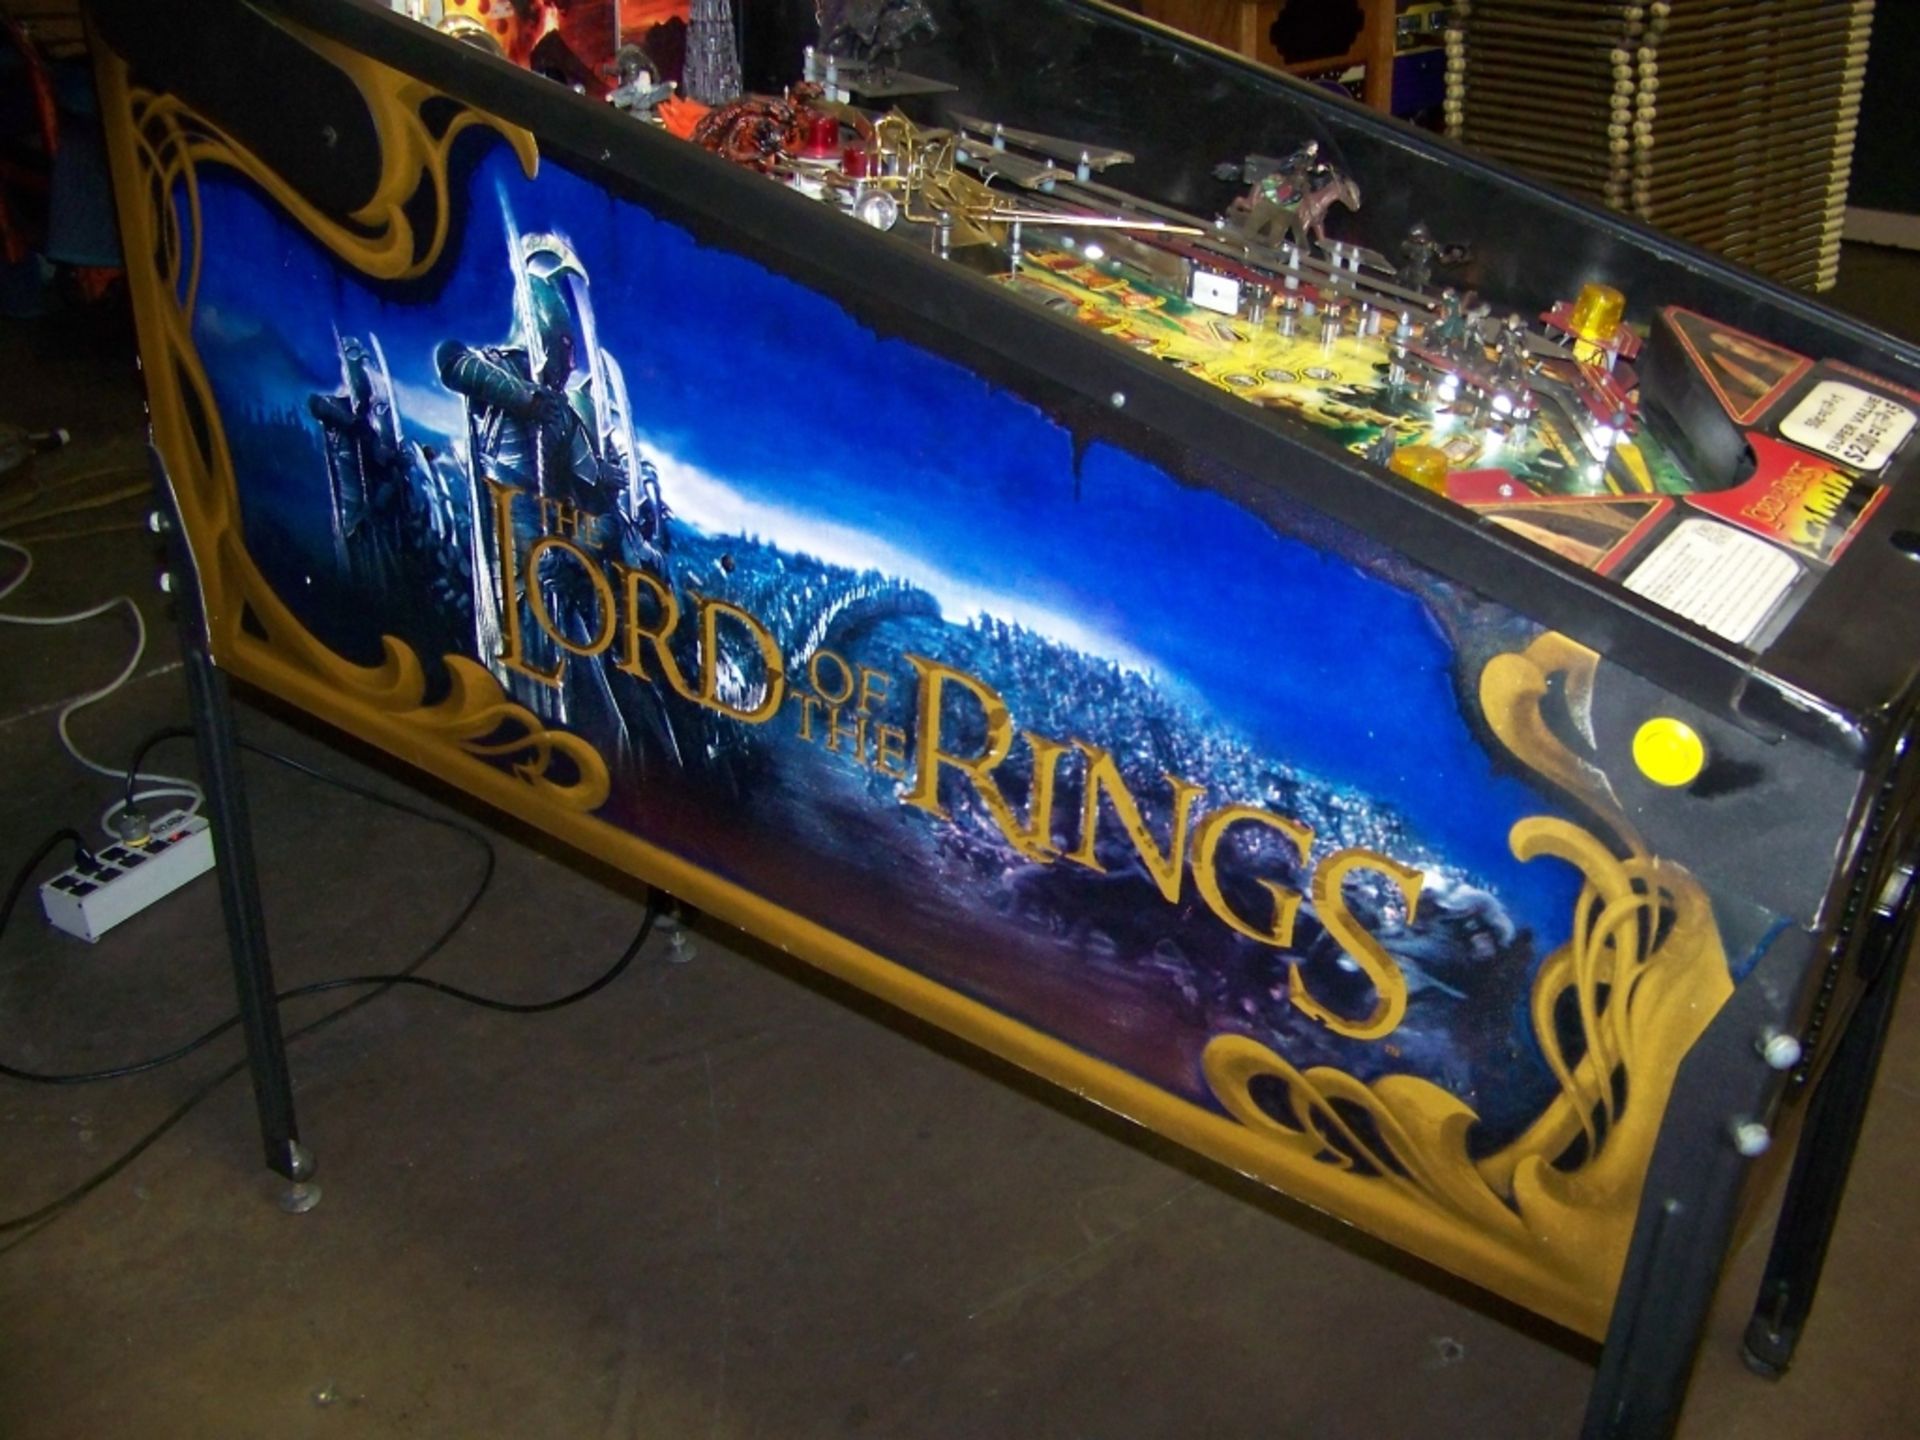 LORD OF THE RINGS PINBALL MACHINE STERN Item is in used condition. Evidence of wear and commercial - Image 5 of 10